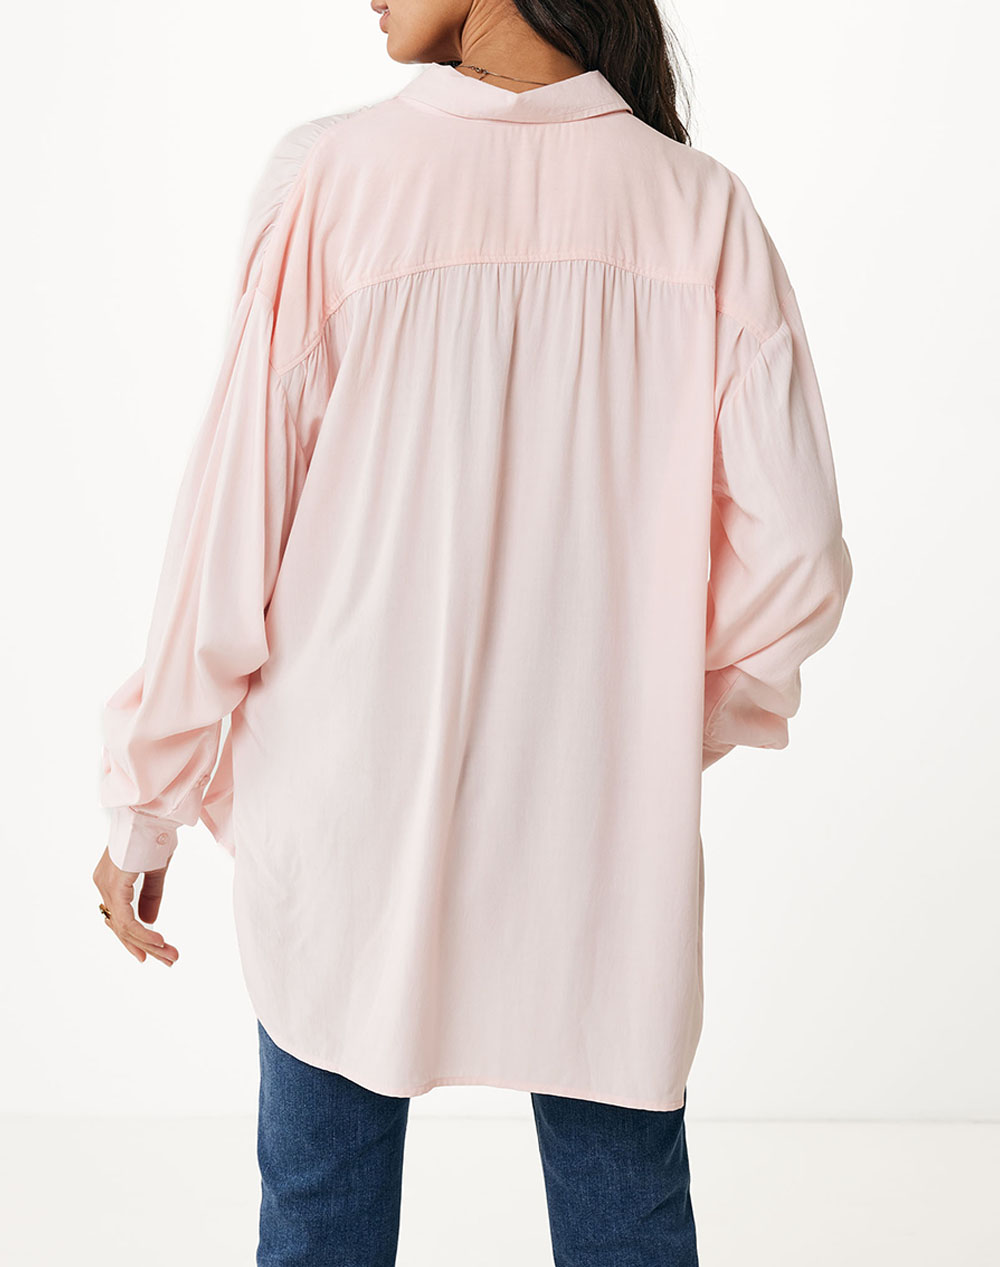 MEXX Cargo blouse with pockets